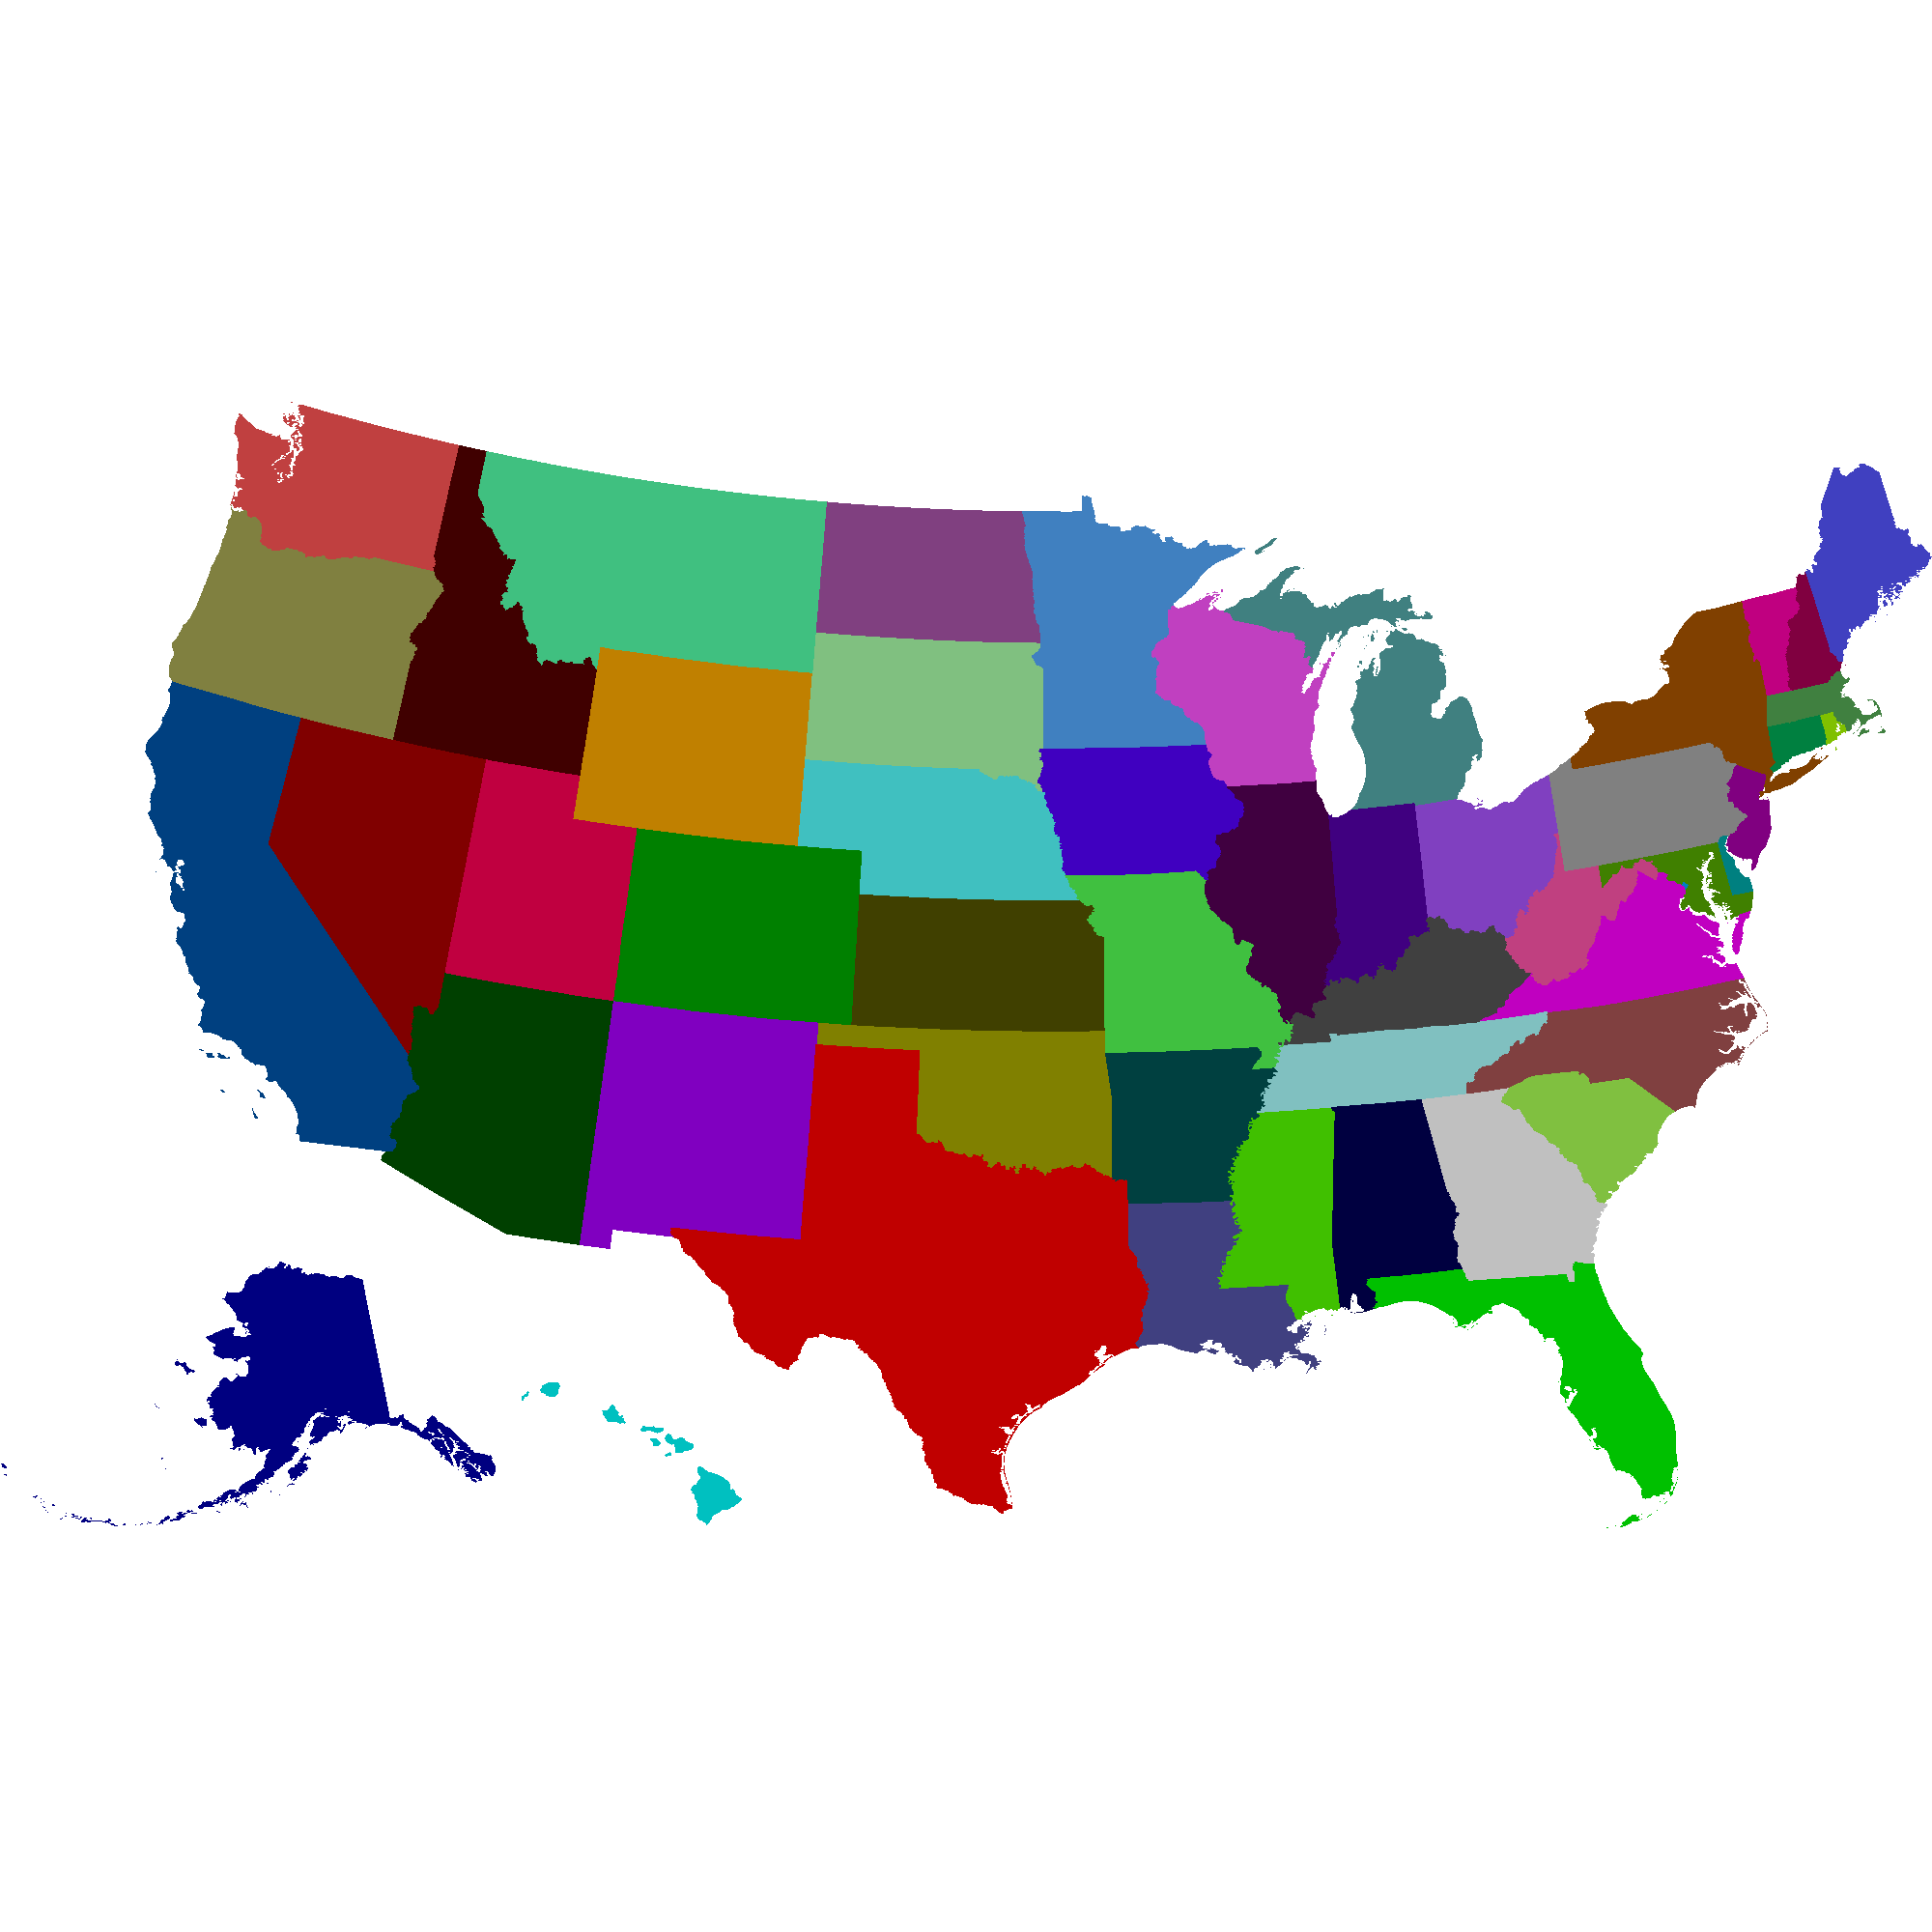 United States Maps with distinct colors for each state.